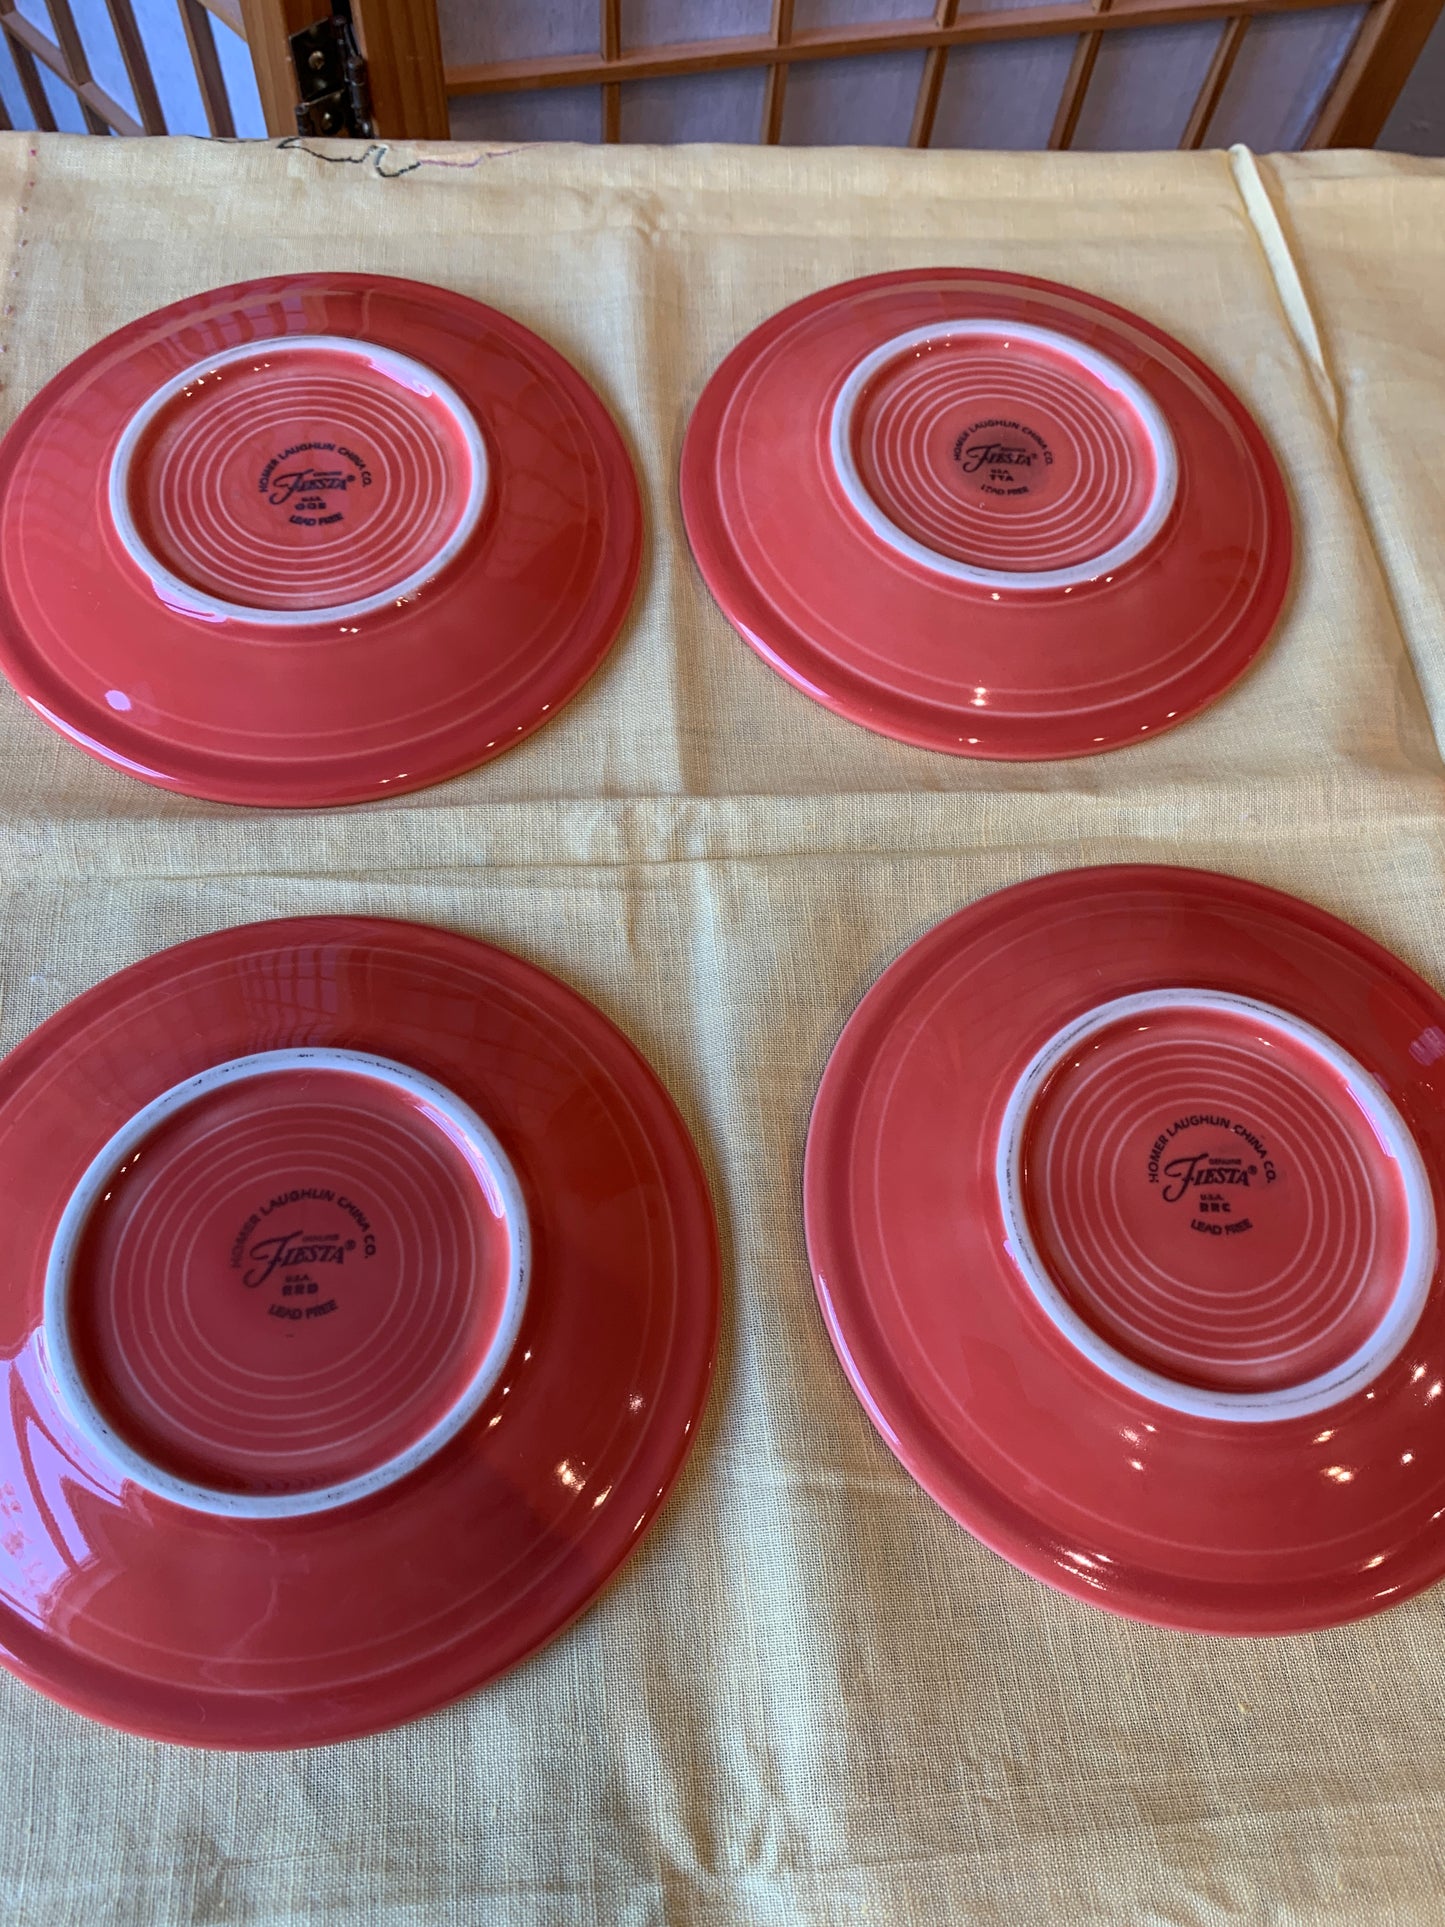 Fiestaware, Homer Laughlin, 4 Cups and 4 Saucers, Persimmon Color